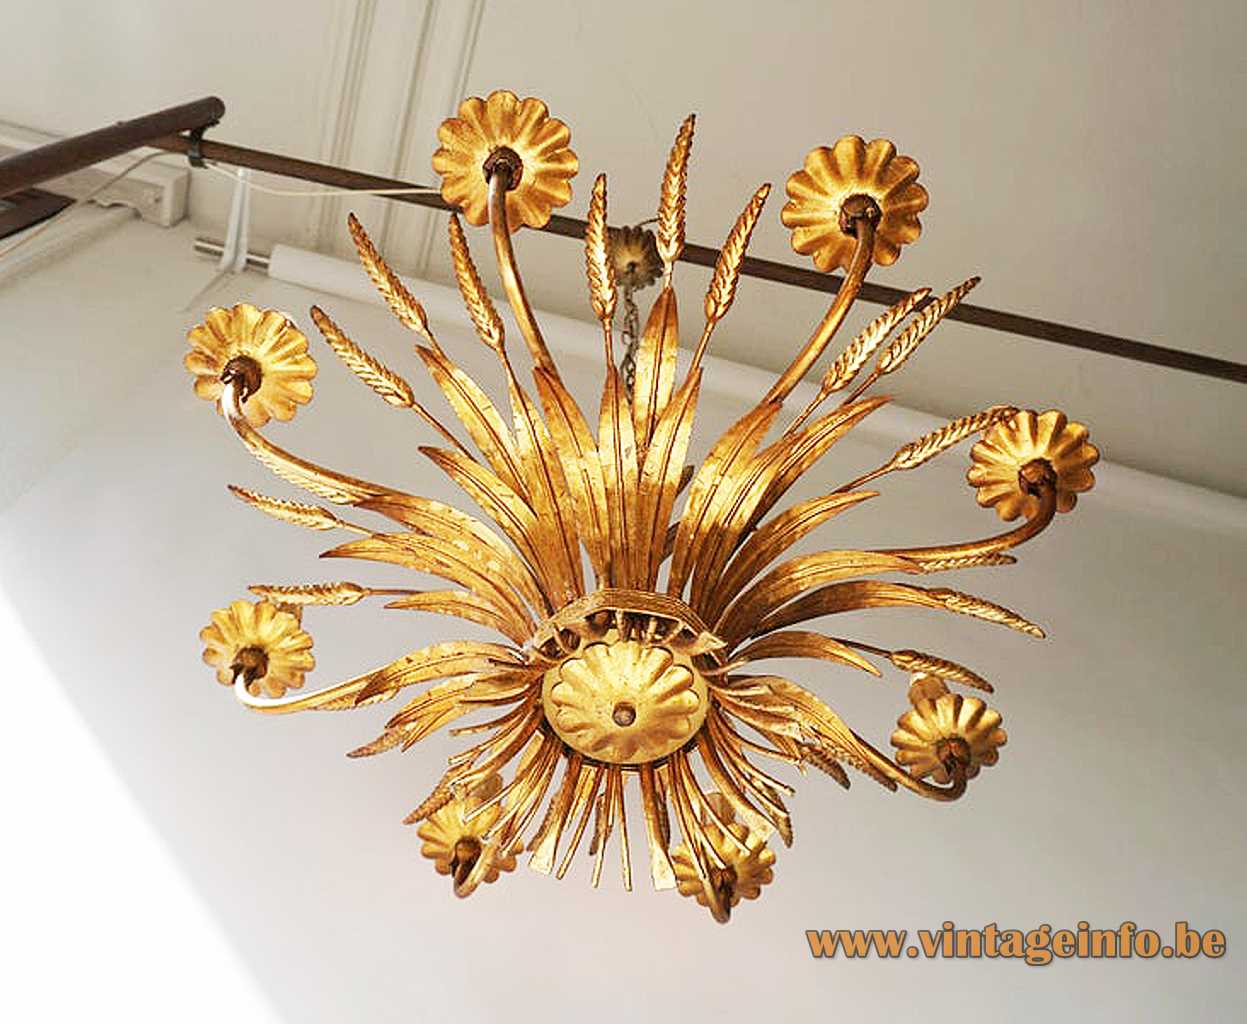 Sheaf of wheat toleware chandelier gold painted curved rods corn leaves lampshade 8 candlesticks 1970s 1980s